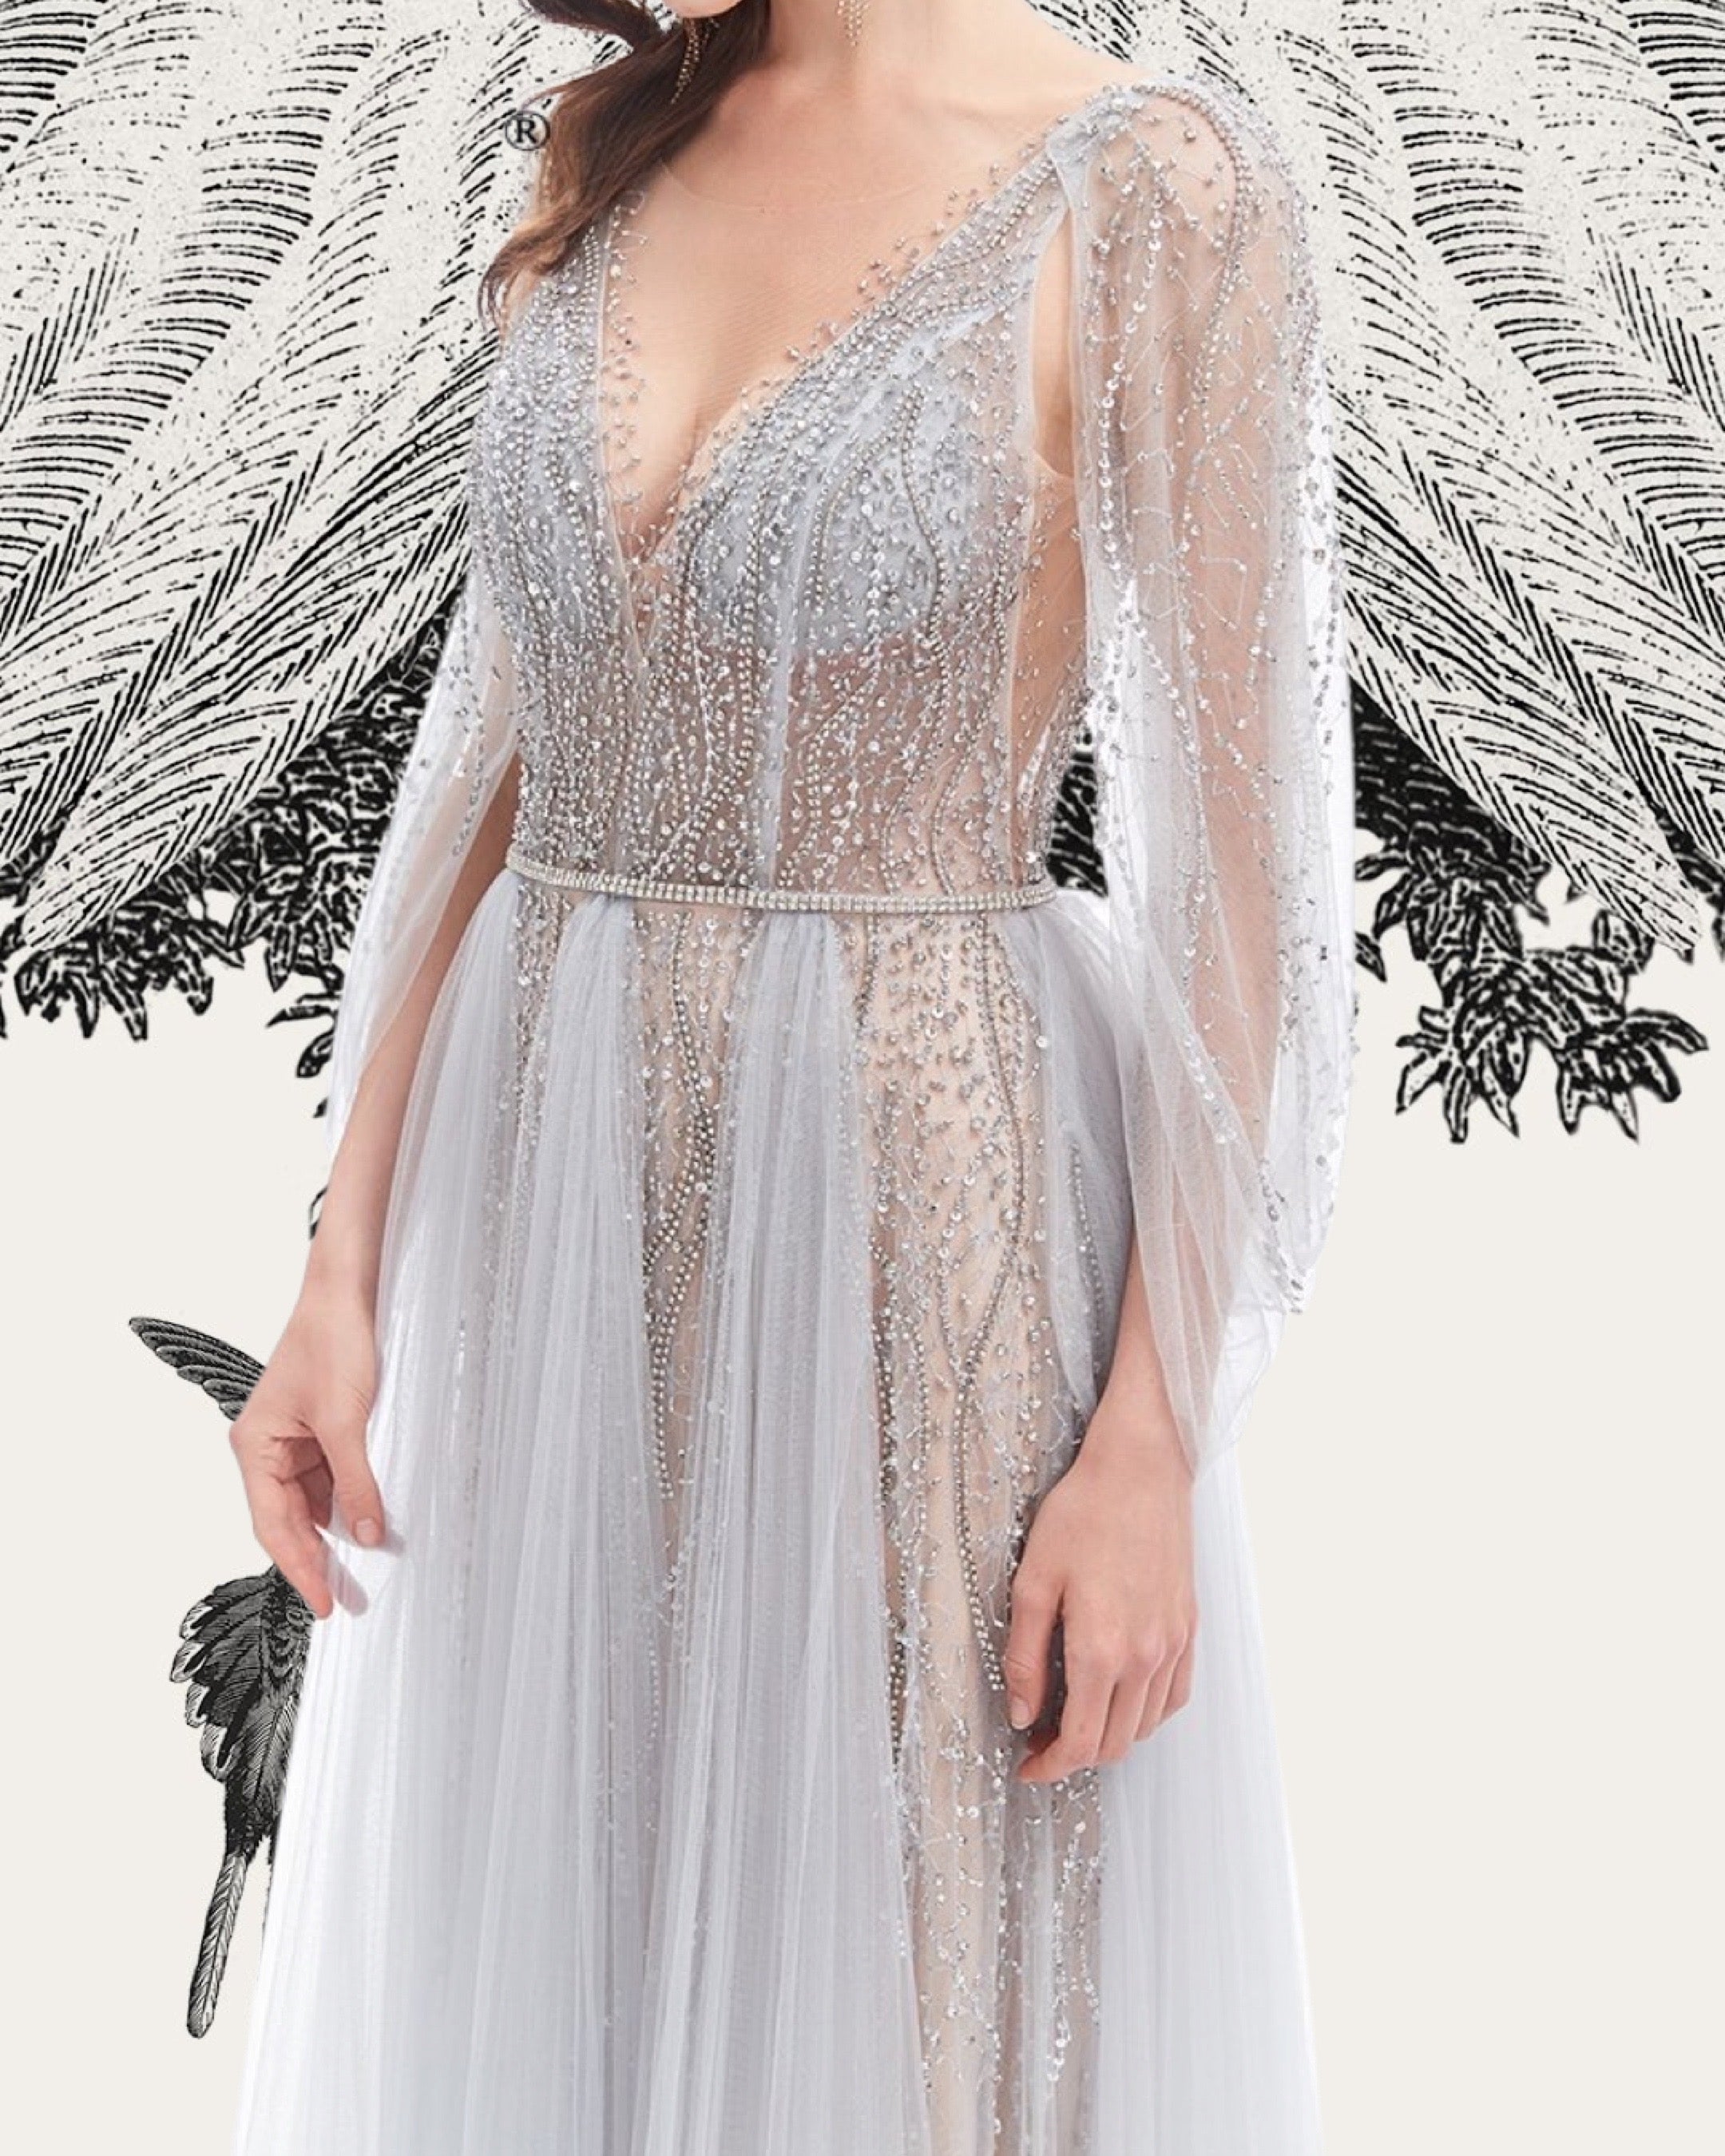 Evening Dress With Cape in Floating Ethereal Stye in Grey & Silver Crystal Bodice - Dhala